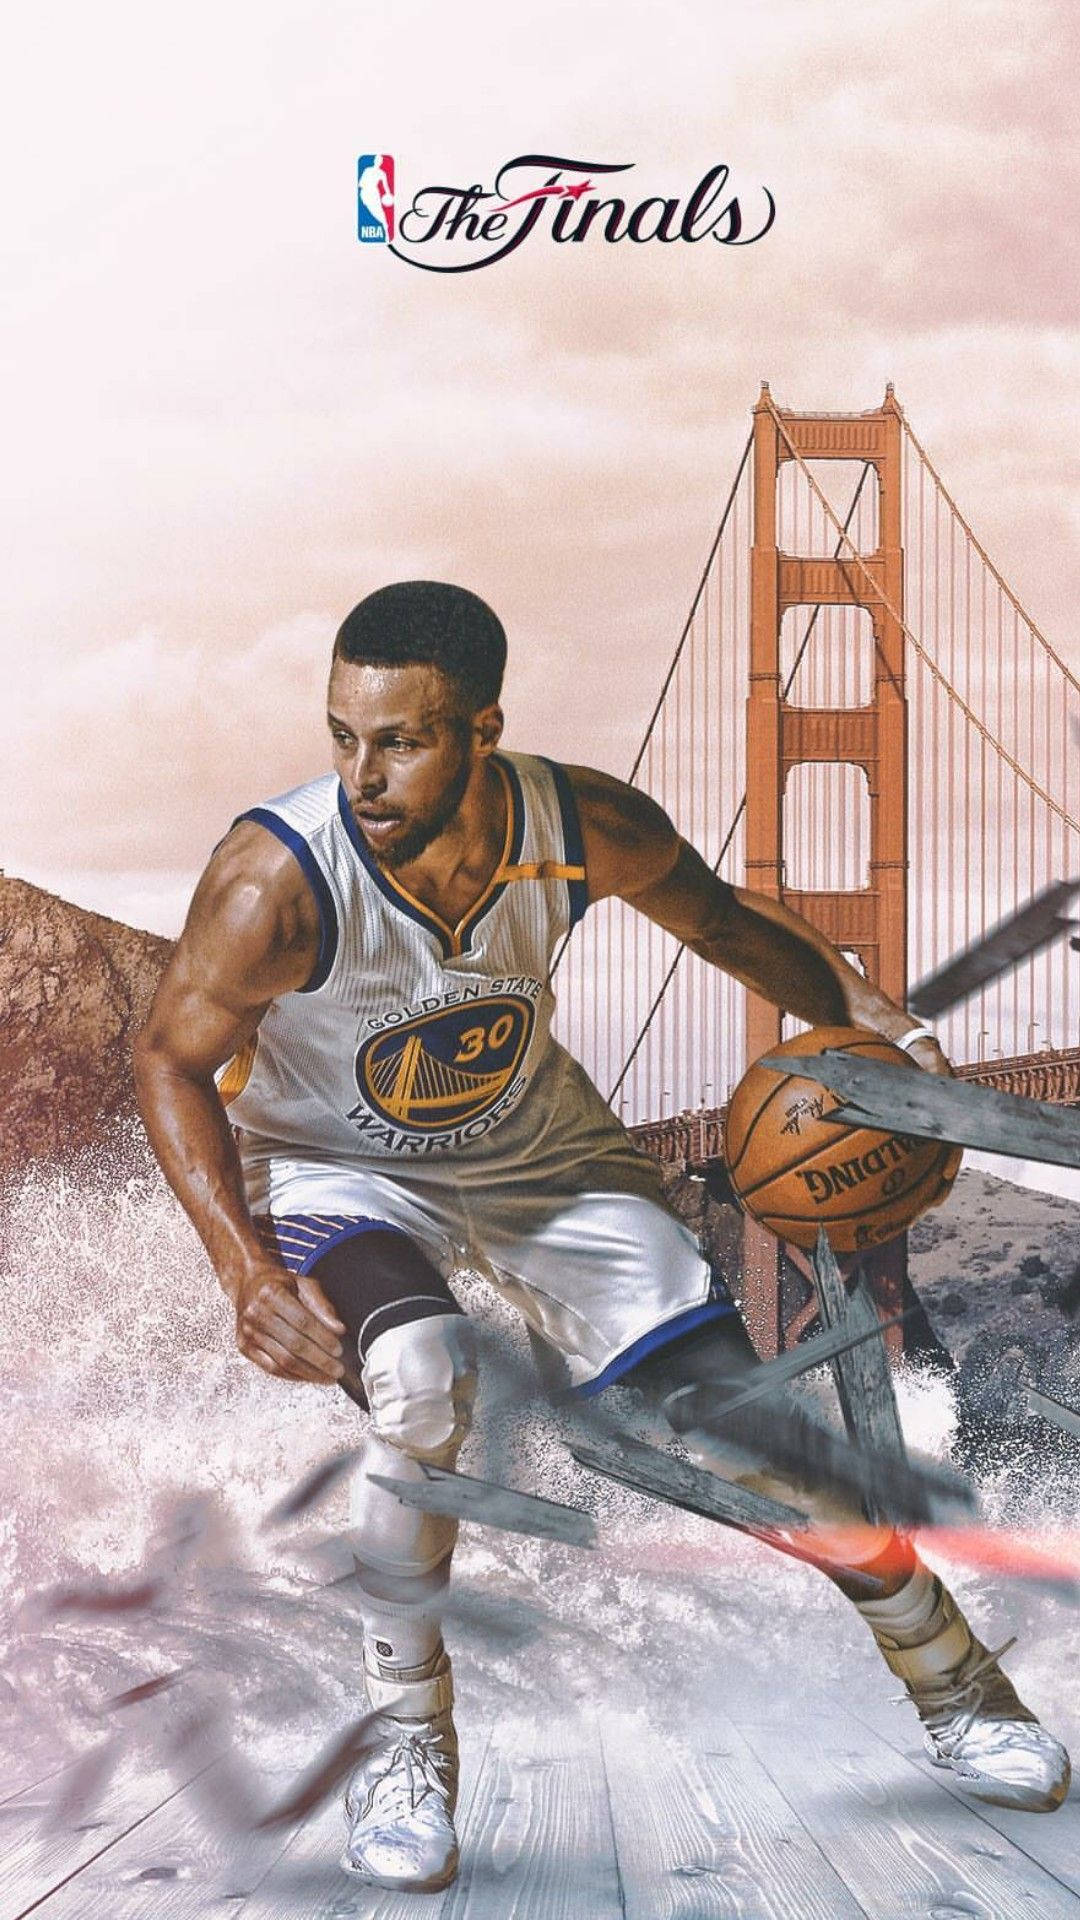 Steph Curry Wallpaper Discover more basketball cool golden state  warriors home scree  Stephen curry wallpaper Golden state warriors  wallpaper Curry wallpaper